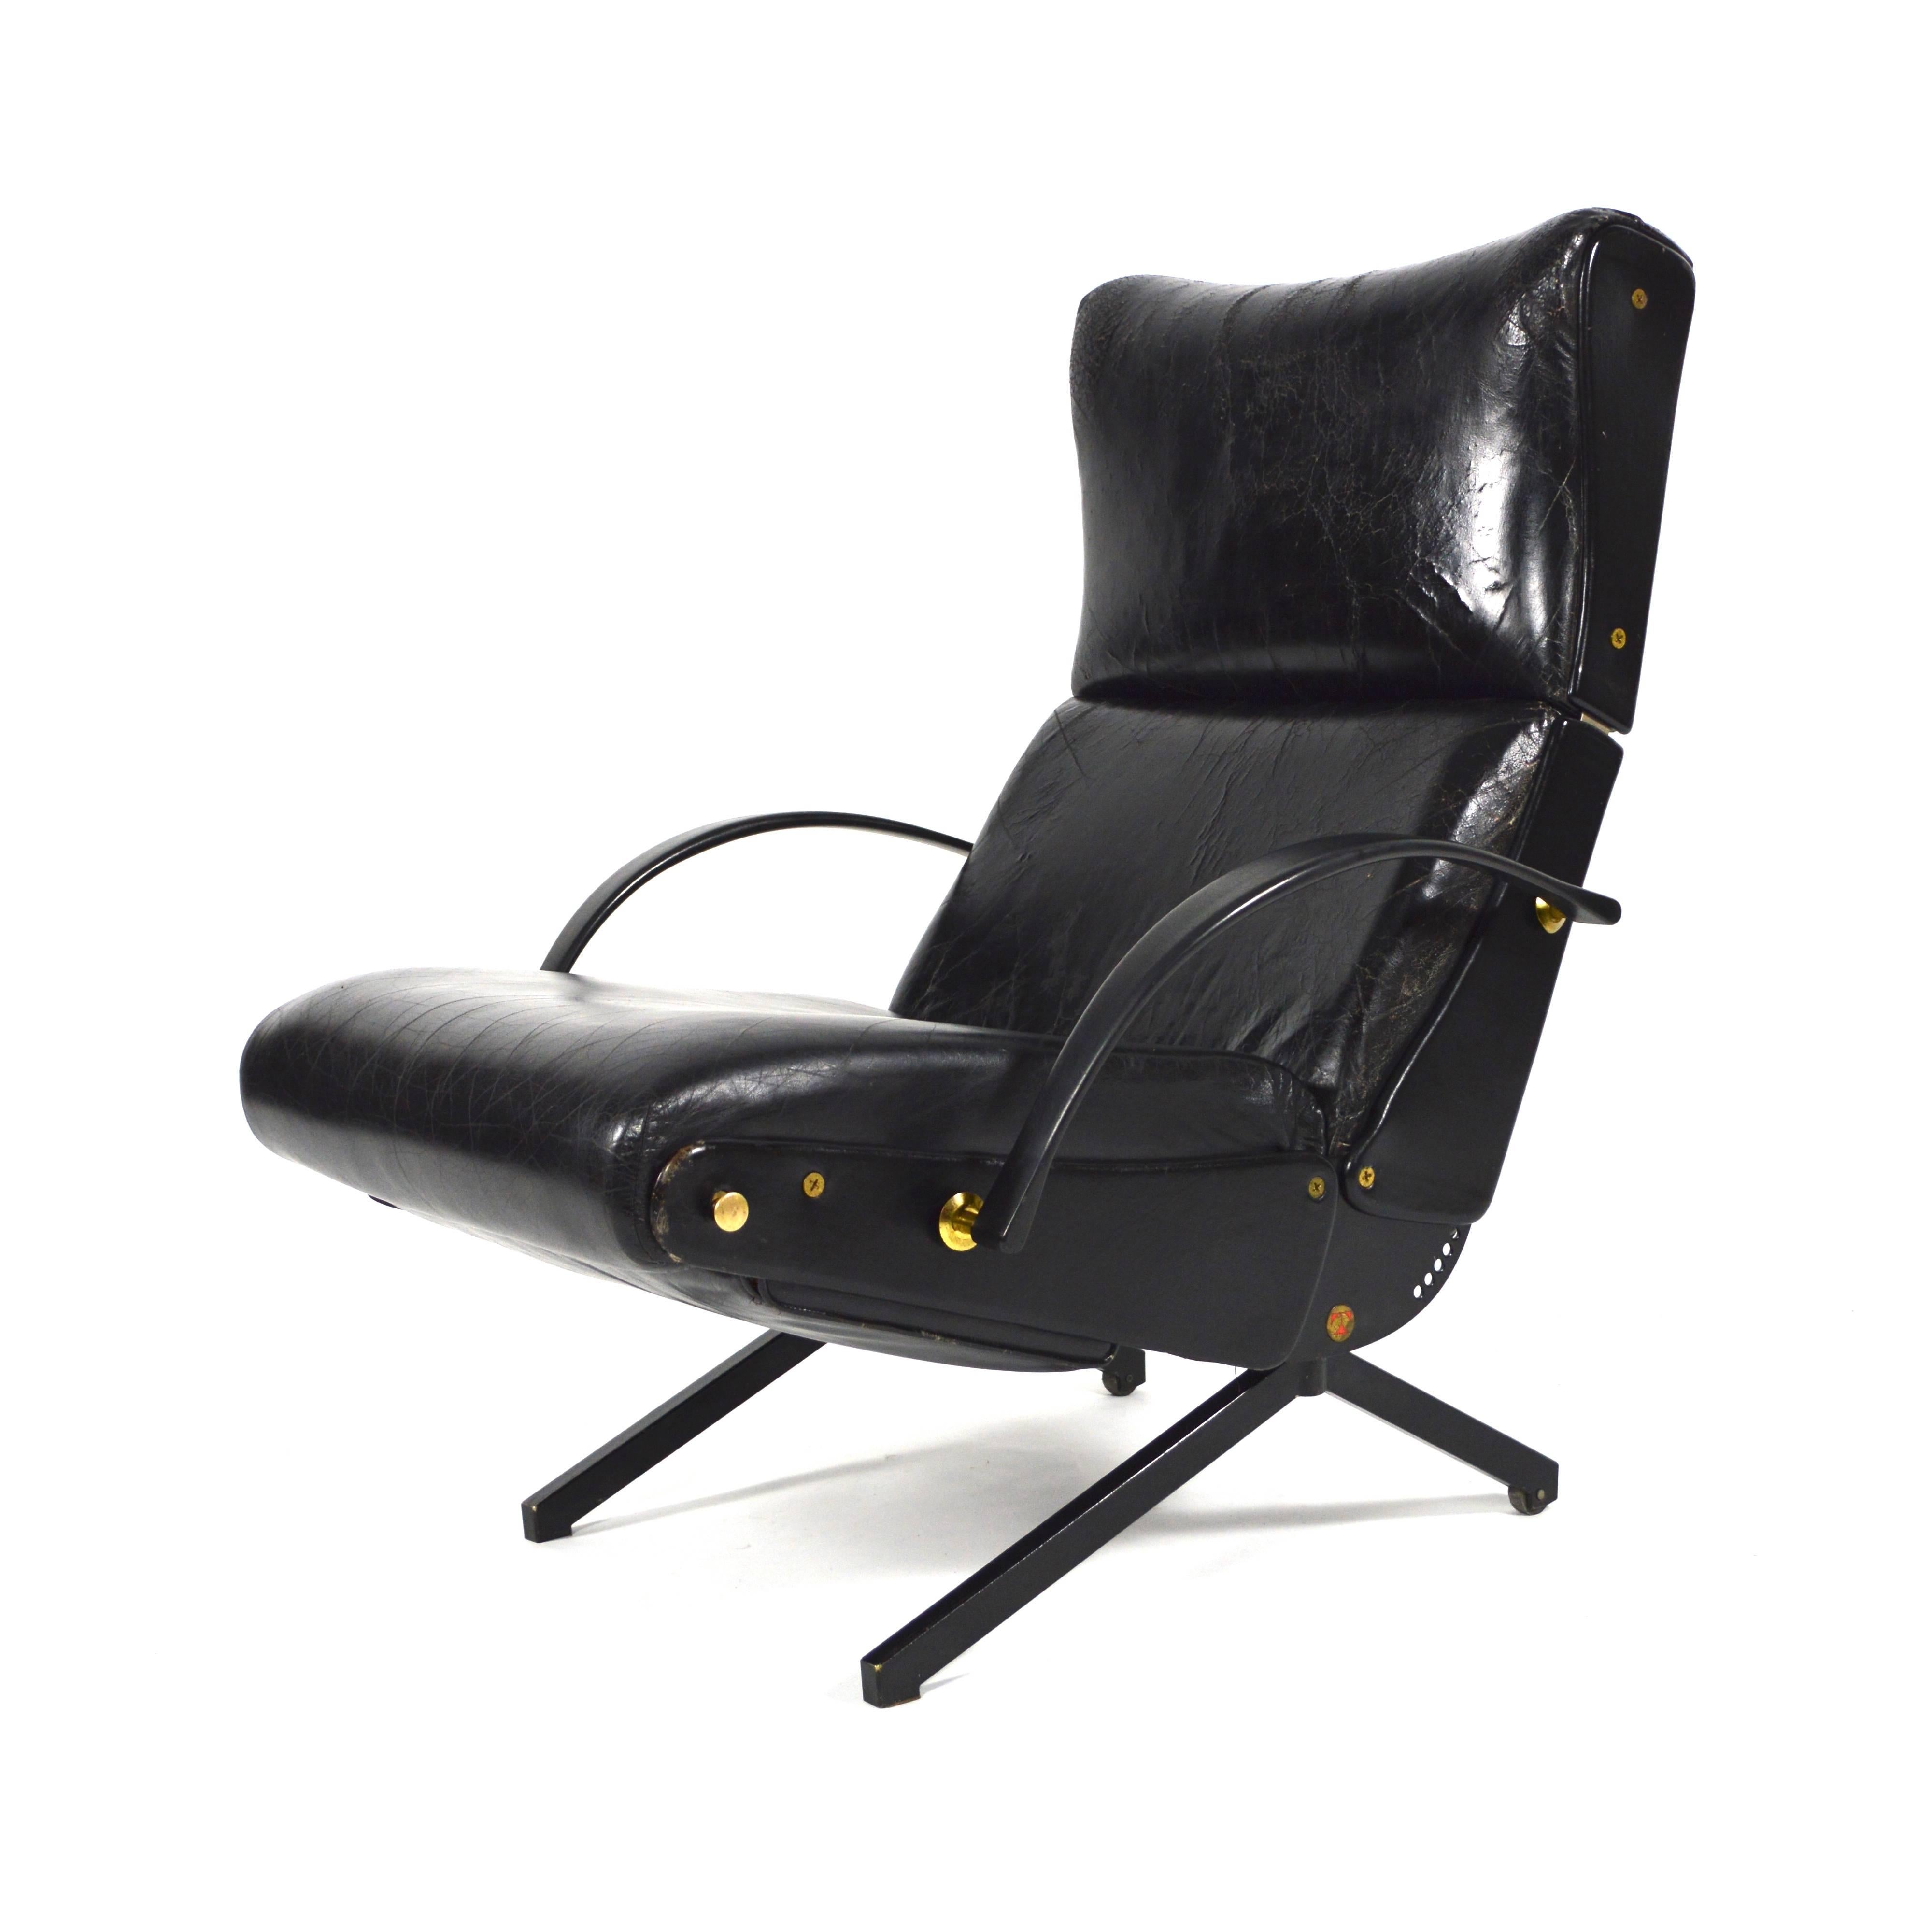 Early edition P40 reclining chair by Osvaldo Borsani.
Black leather with brass details.
The rear legs have wheels.
The leather is distressed on the front side of the backrest, but no tears or holes.
 